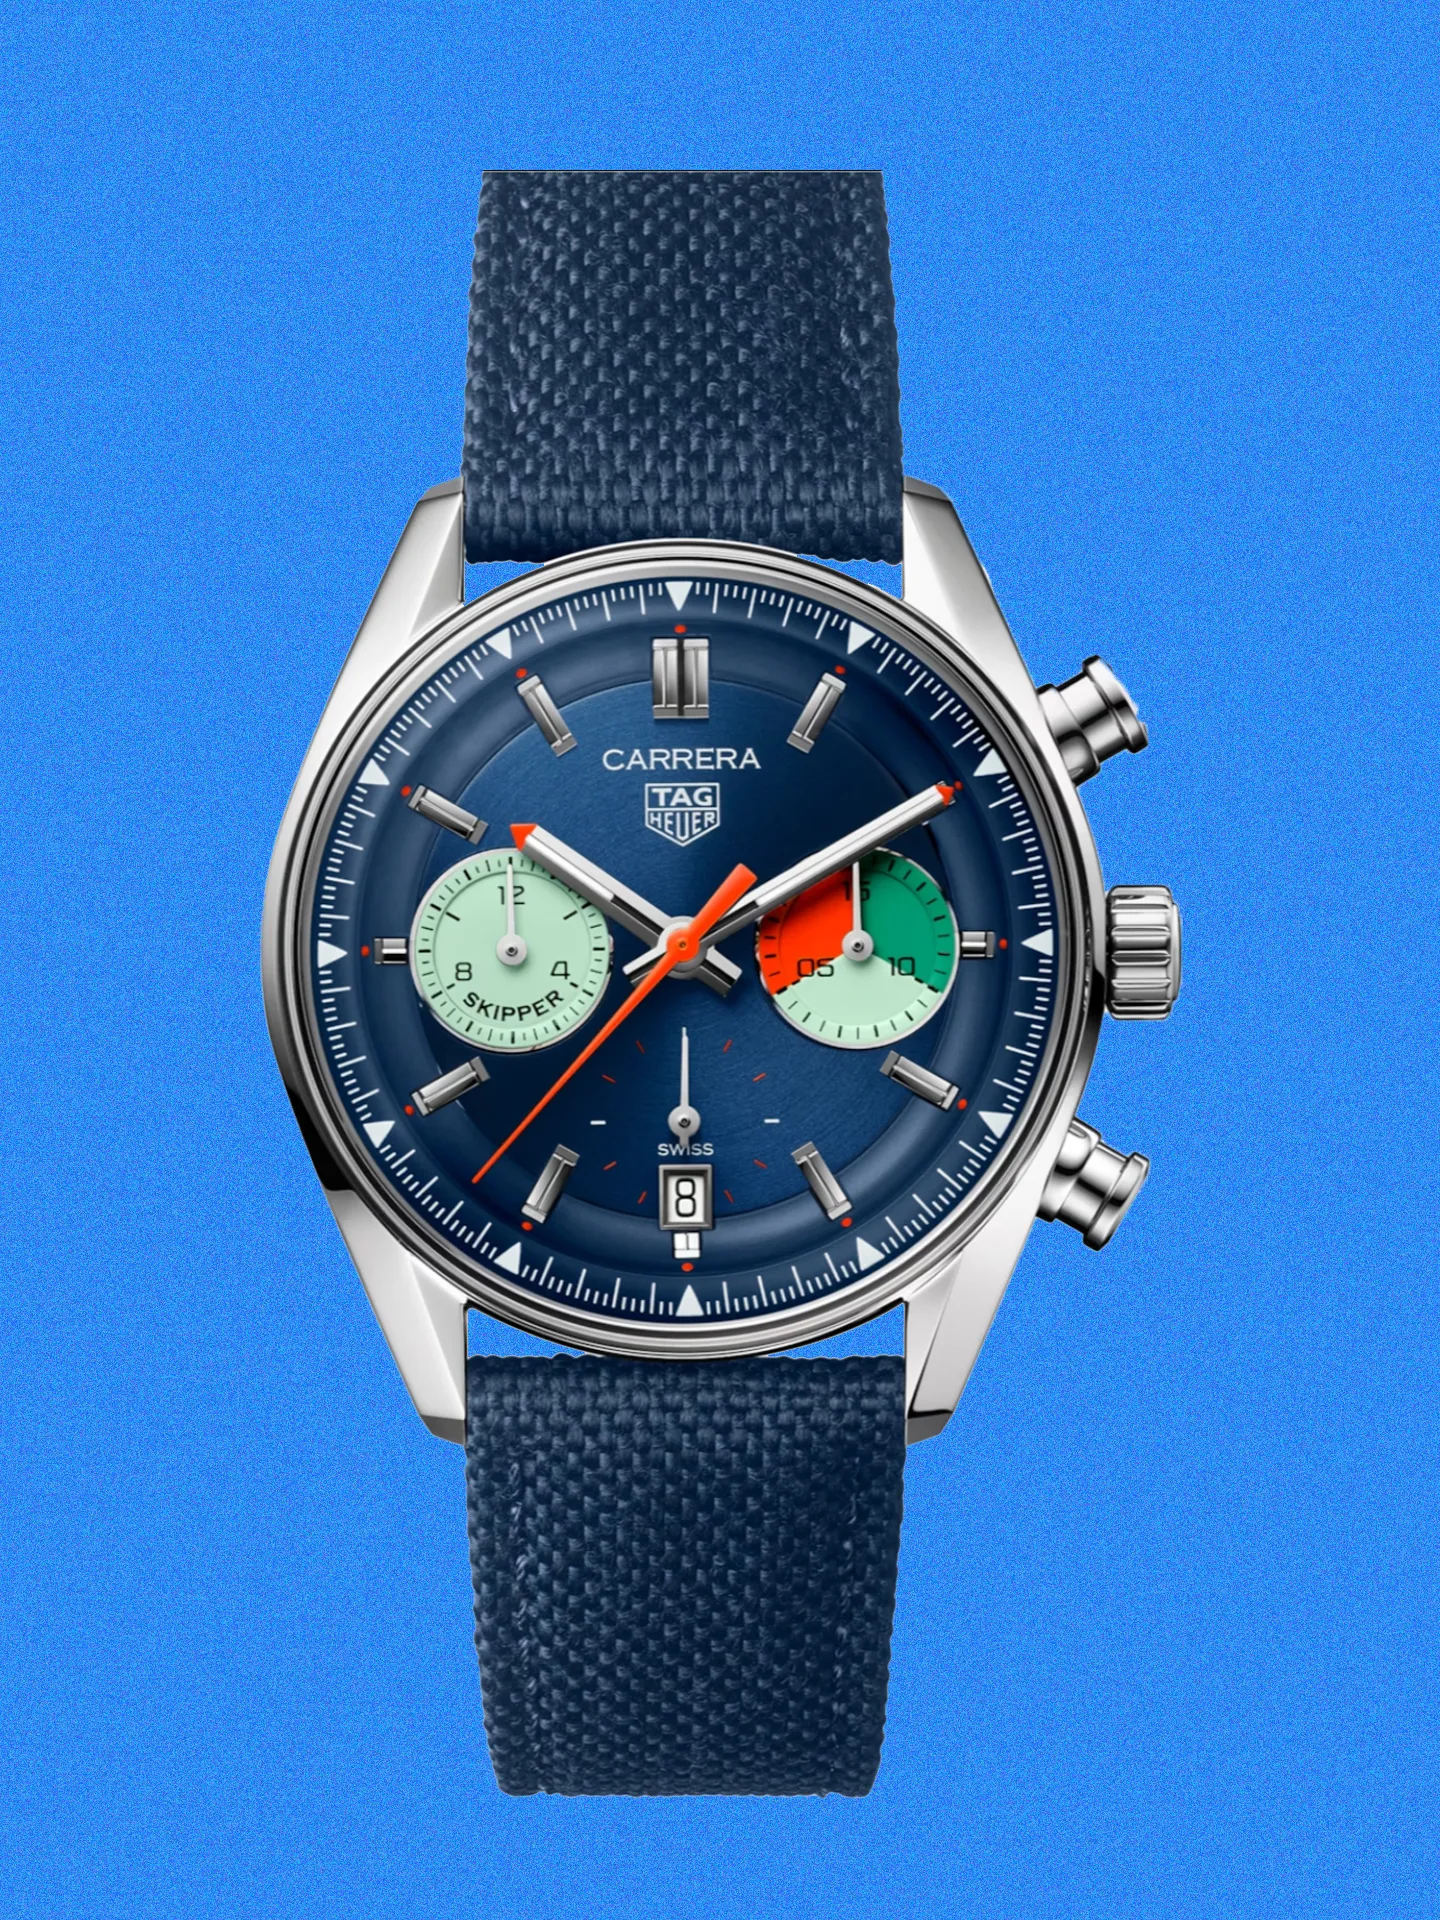 The expert-approved new automatic replica watches online to get your hands on